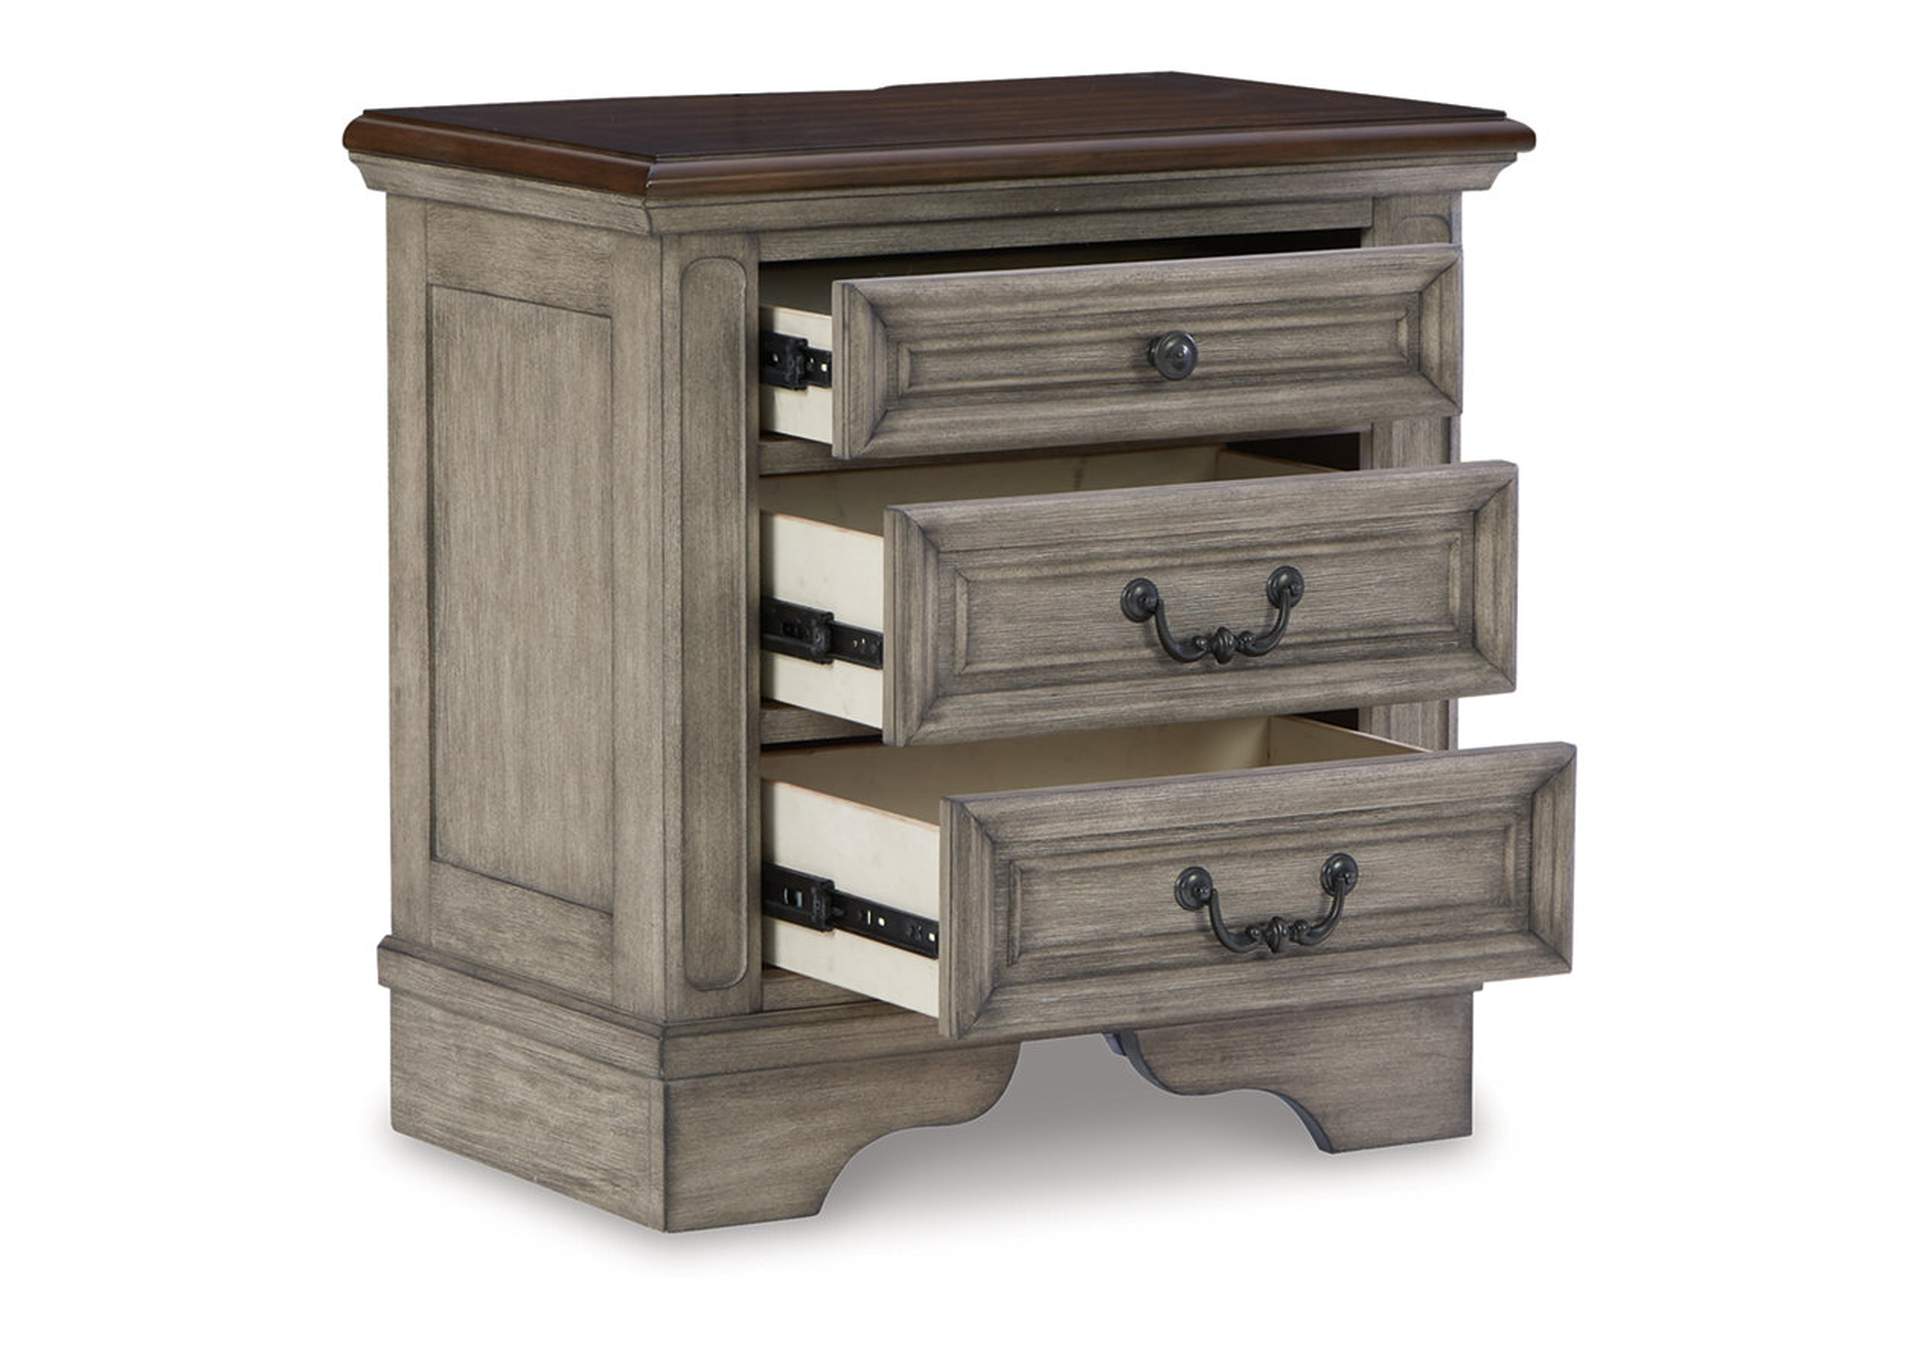 Lodenbay Nightstand,Signature Design By Ashley